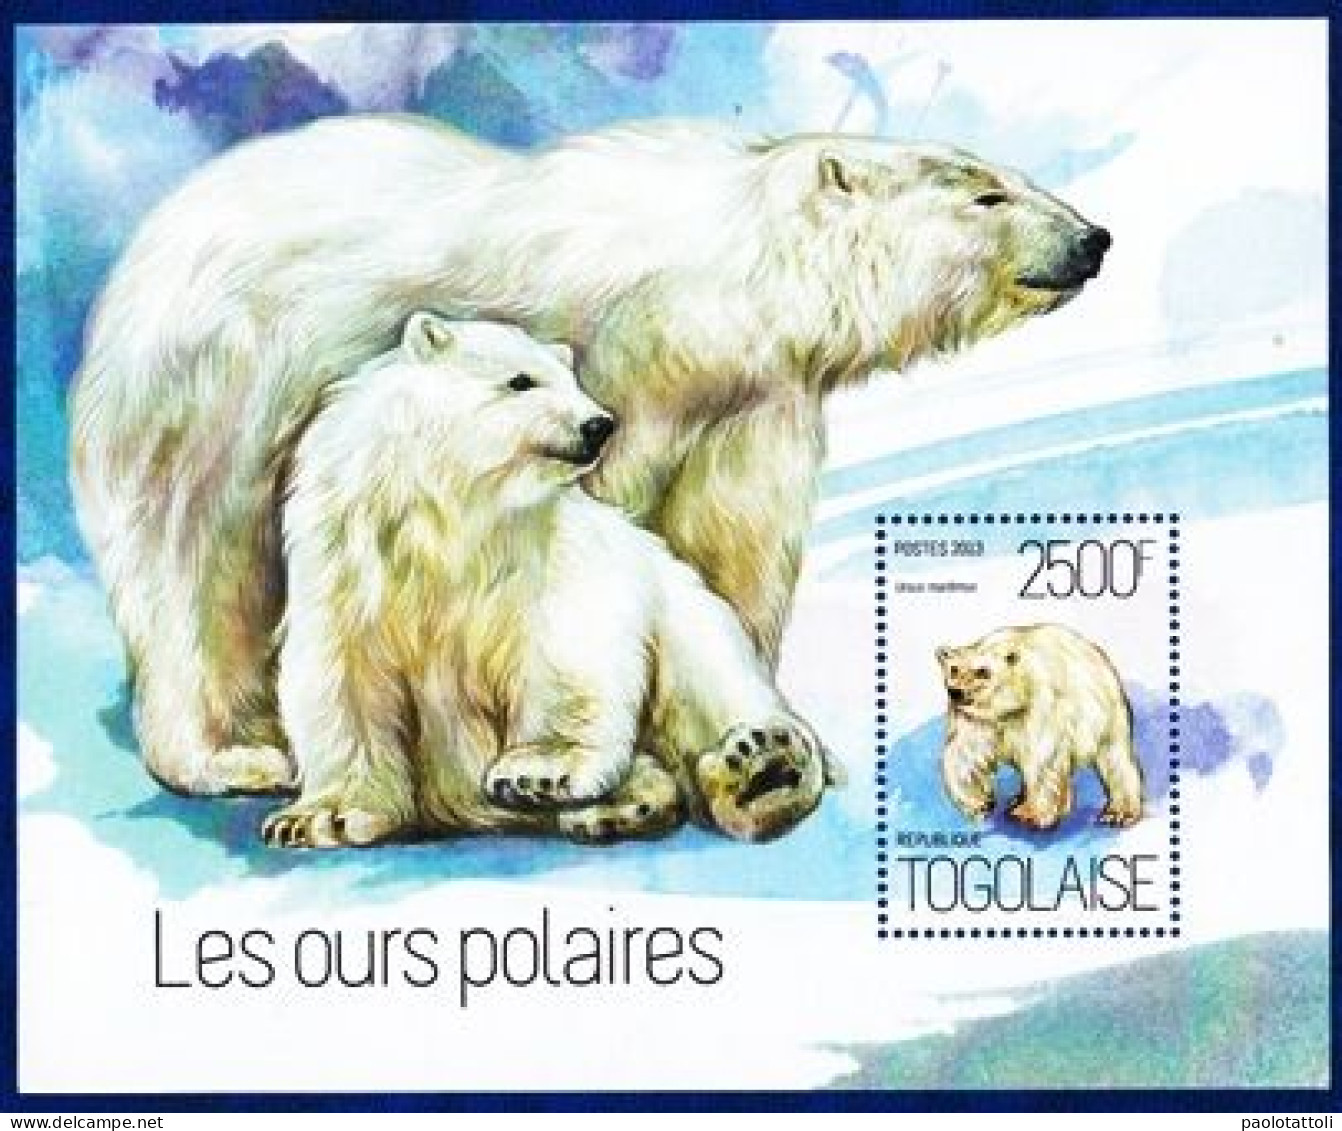 Togo, 2013- Les Ours Polaires-2500F- Block NewNH - Bären